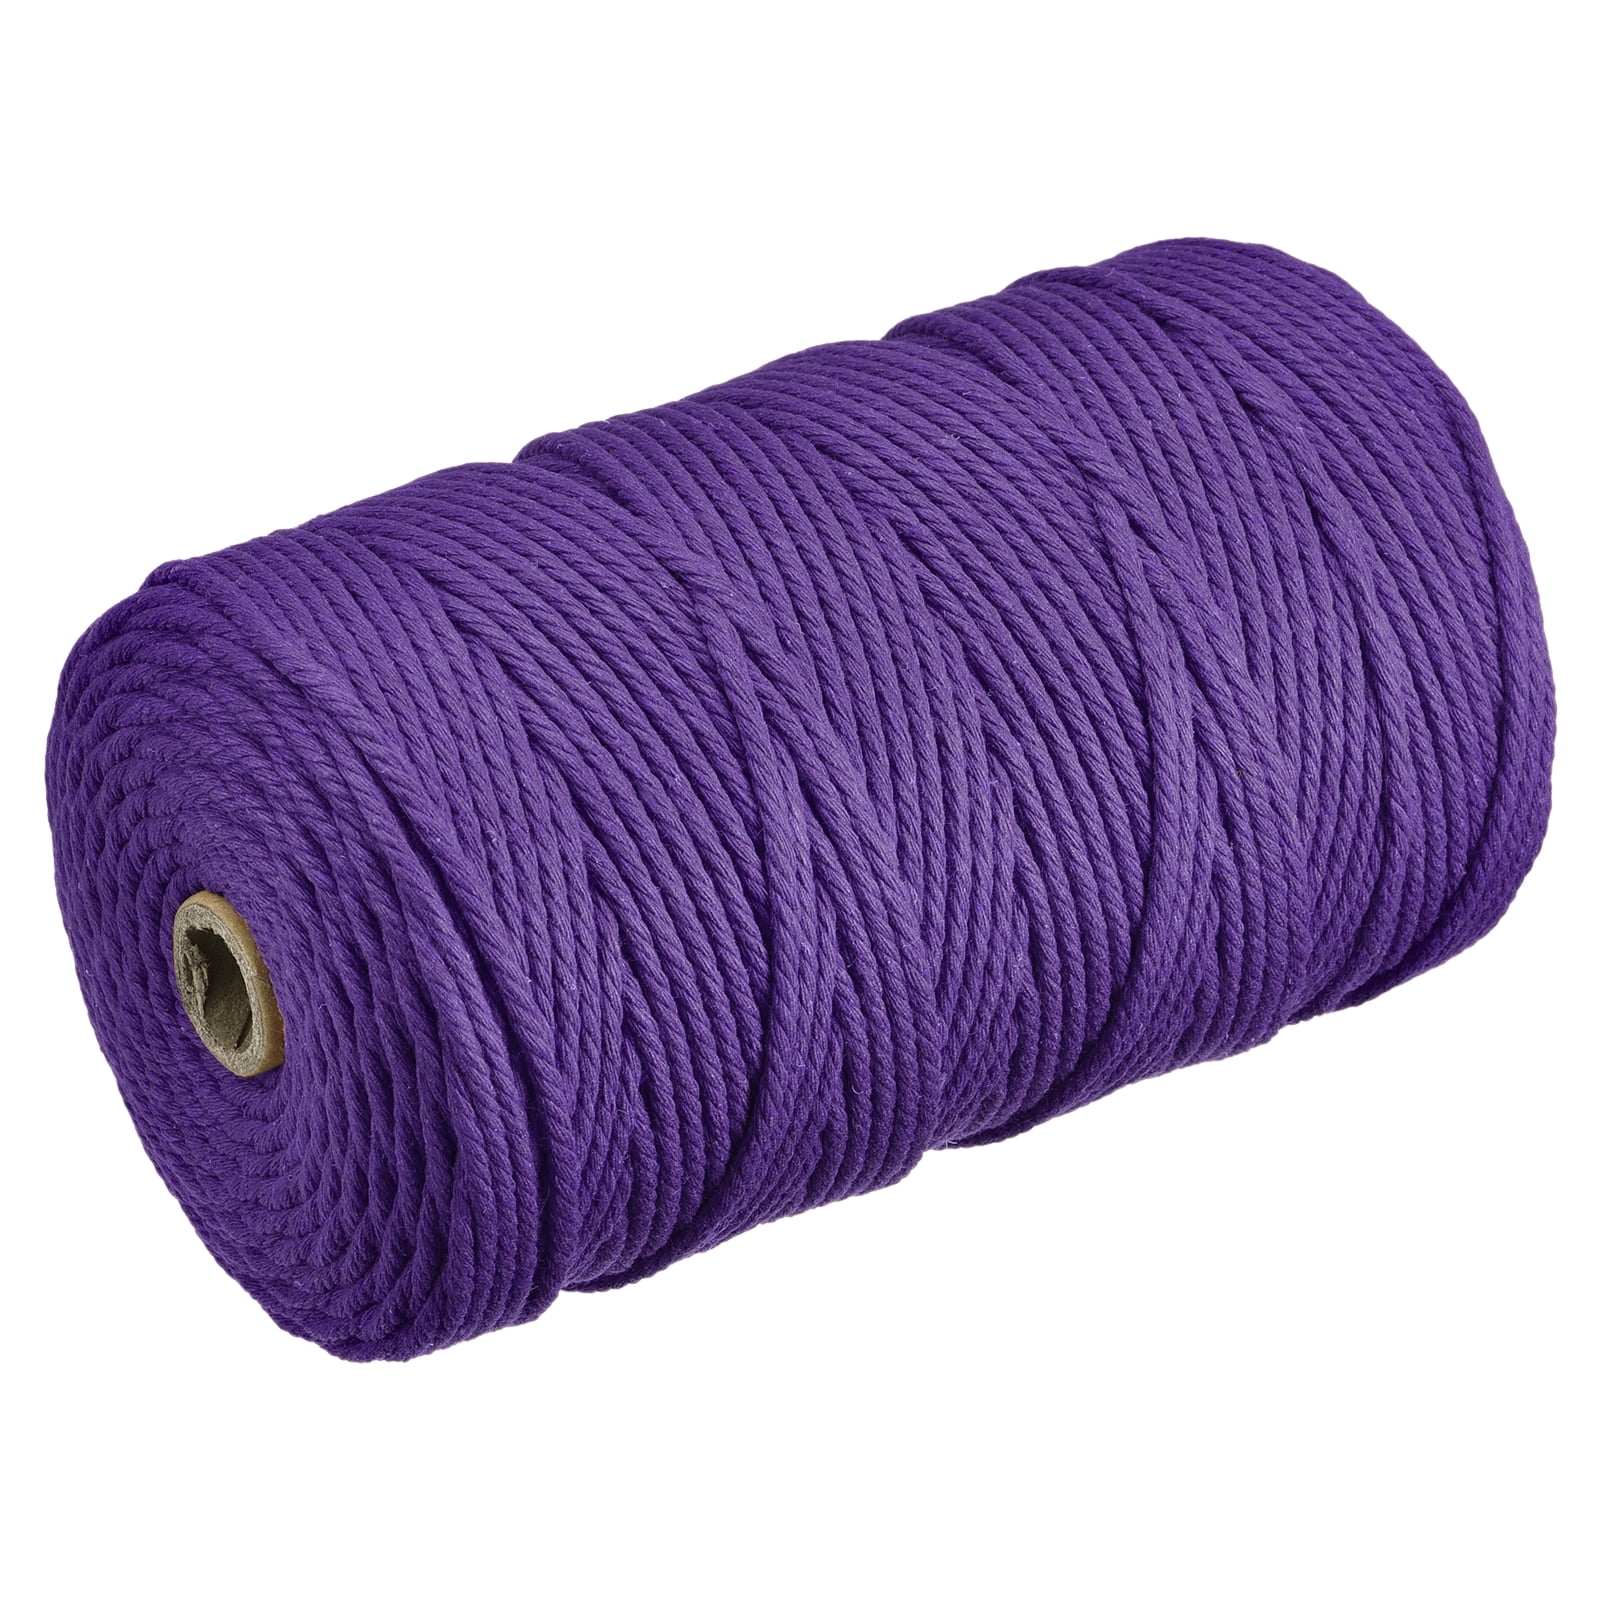 1/4 Inch Twisted Cotton Rope - Royal Blue